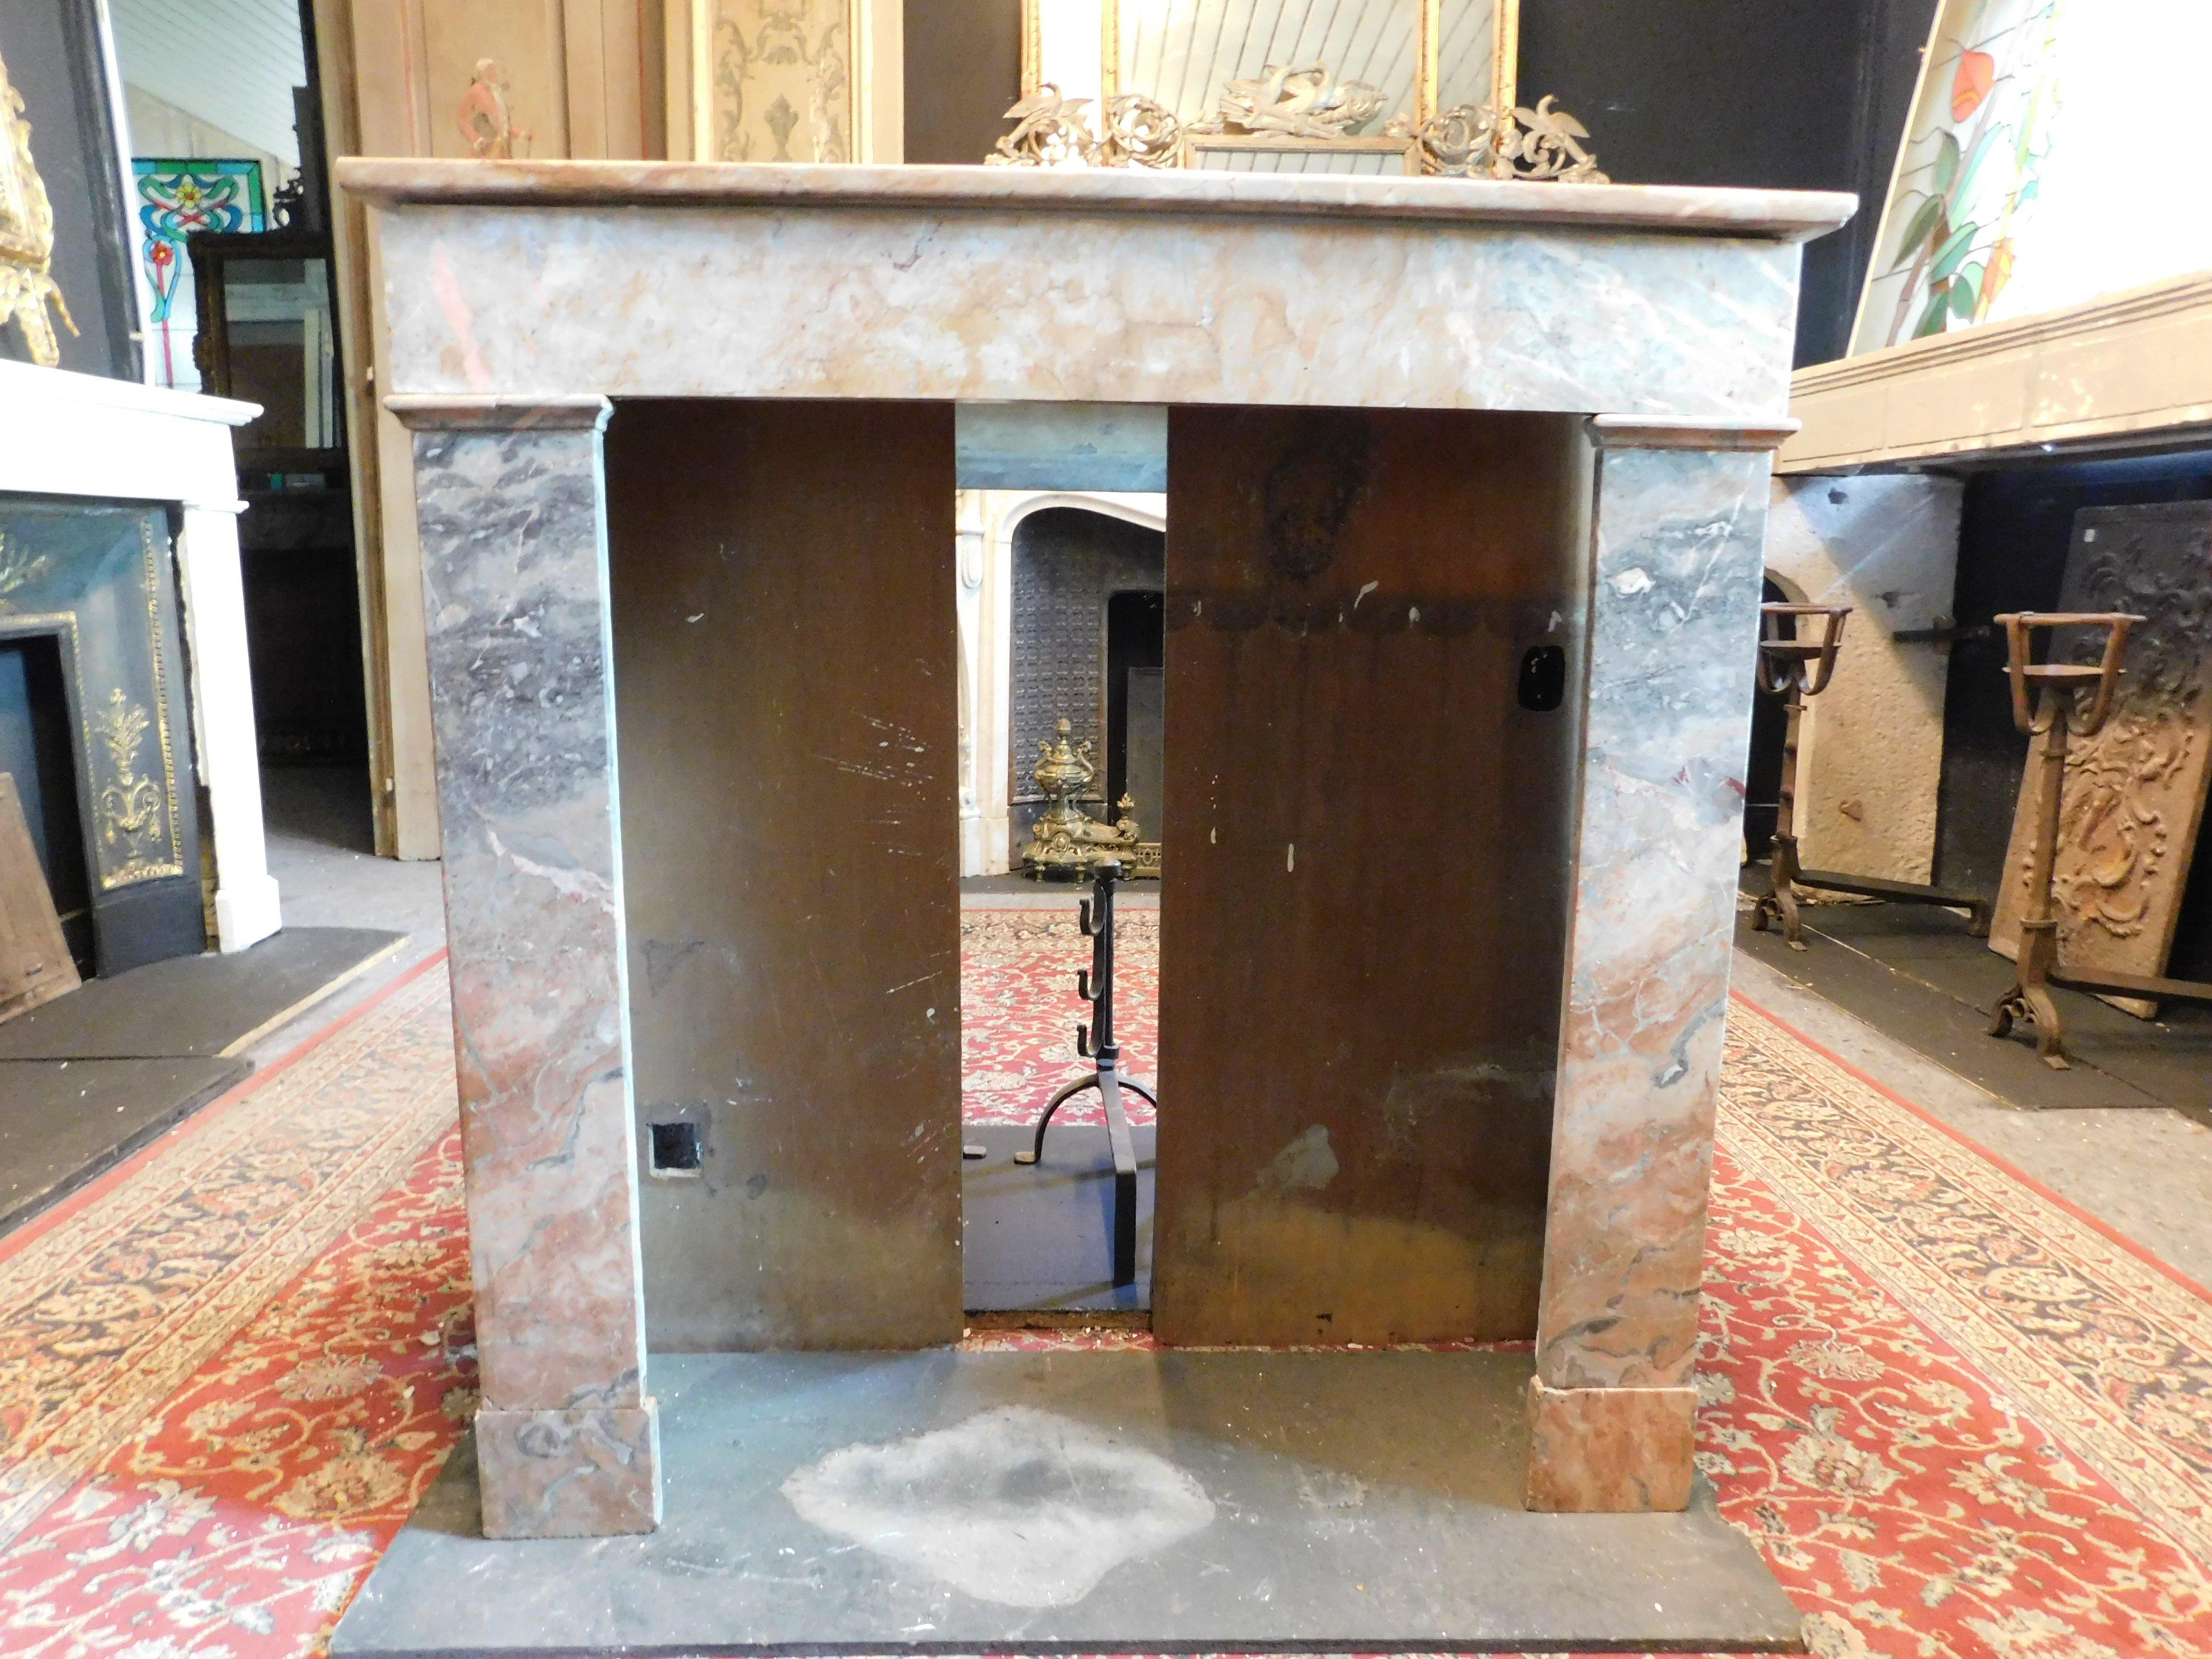 Vintage fireplace mantle in gray and pink marble, special marble called fior di pesco, from Italy, from the early 1900s, maximum external dimensions cm W 101 x H 101 x D 32, internal mouth dimensions cm W 70 x H 86